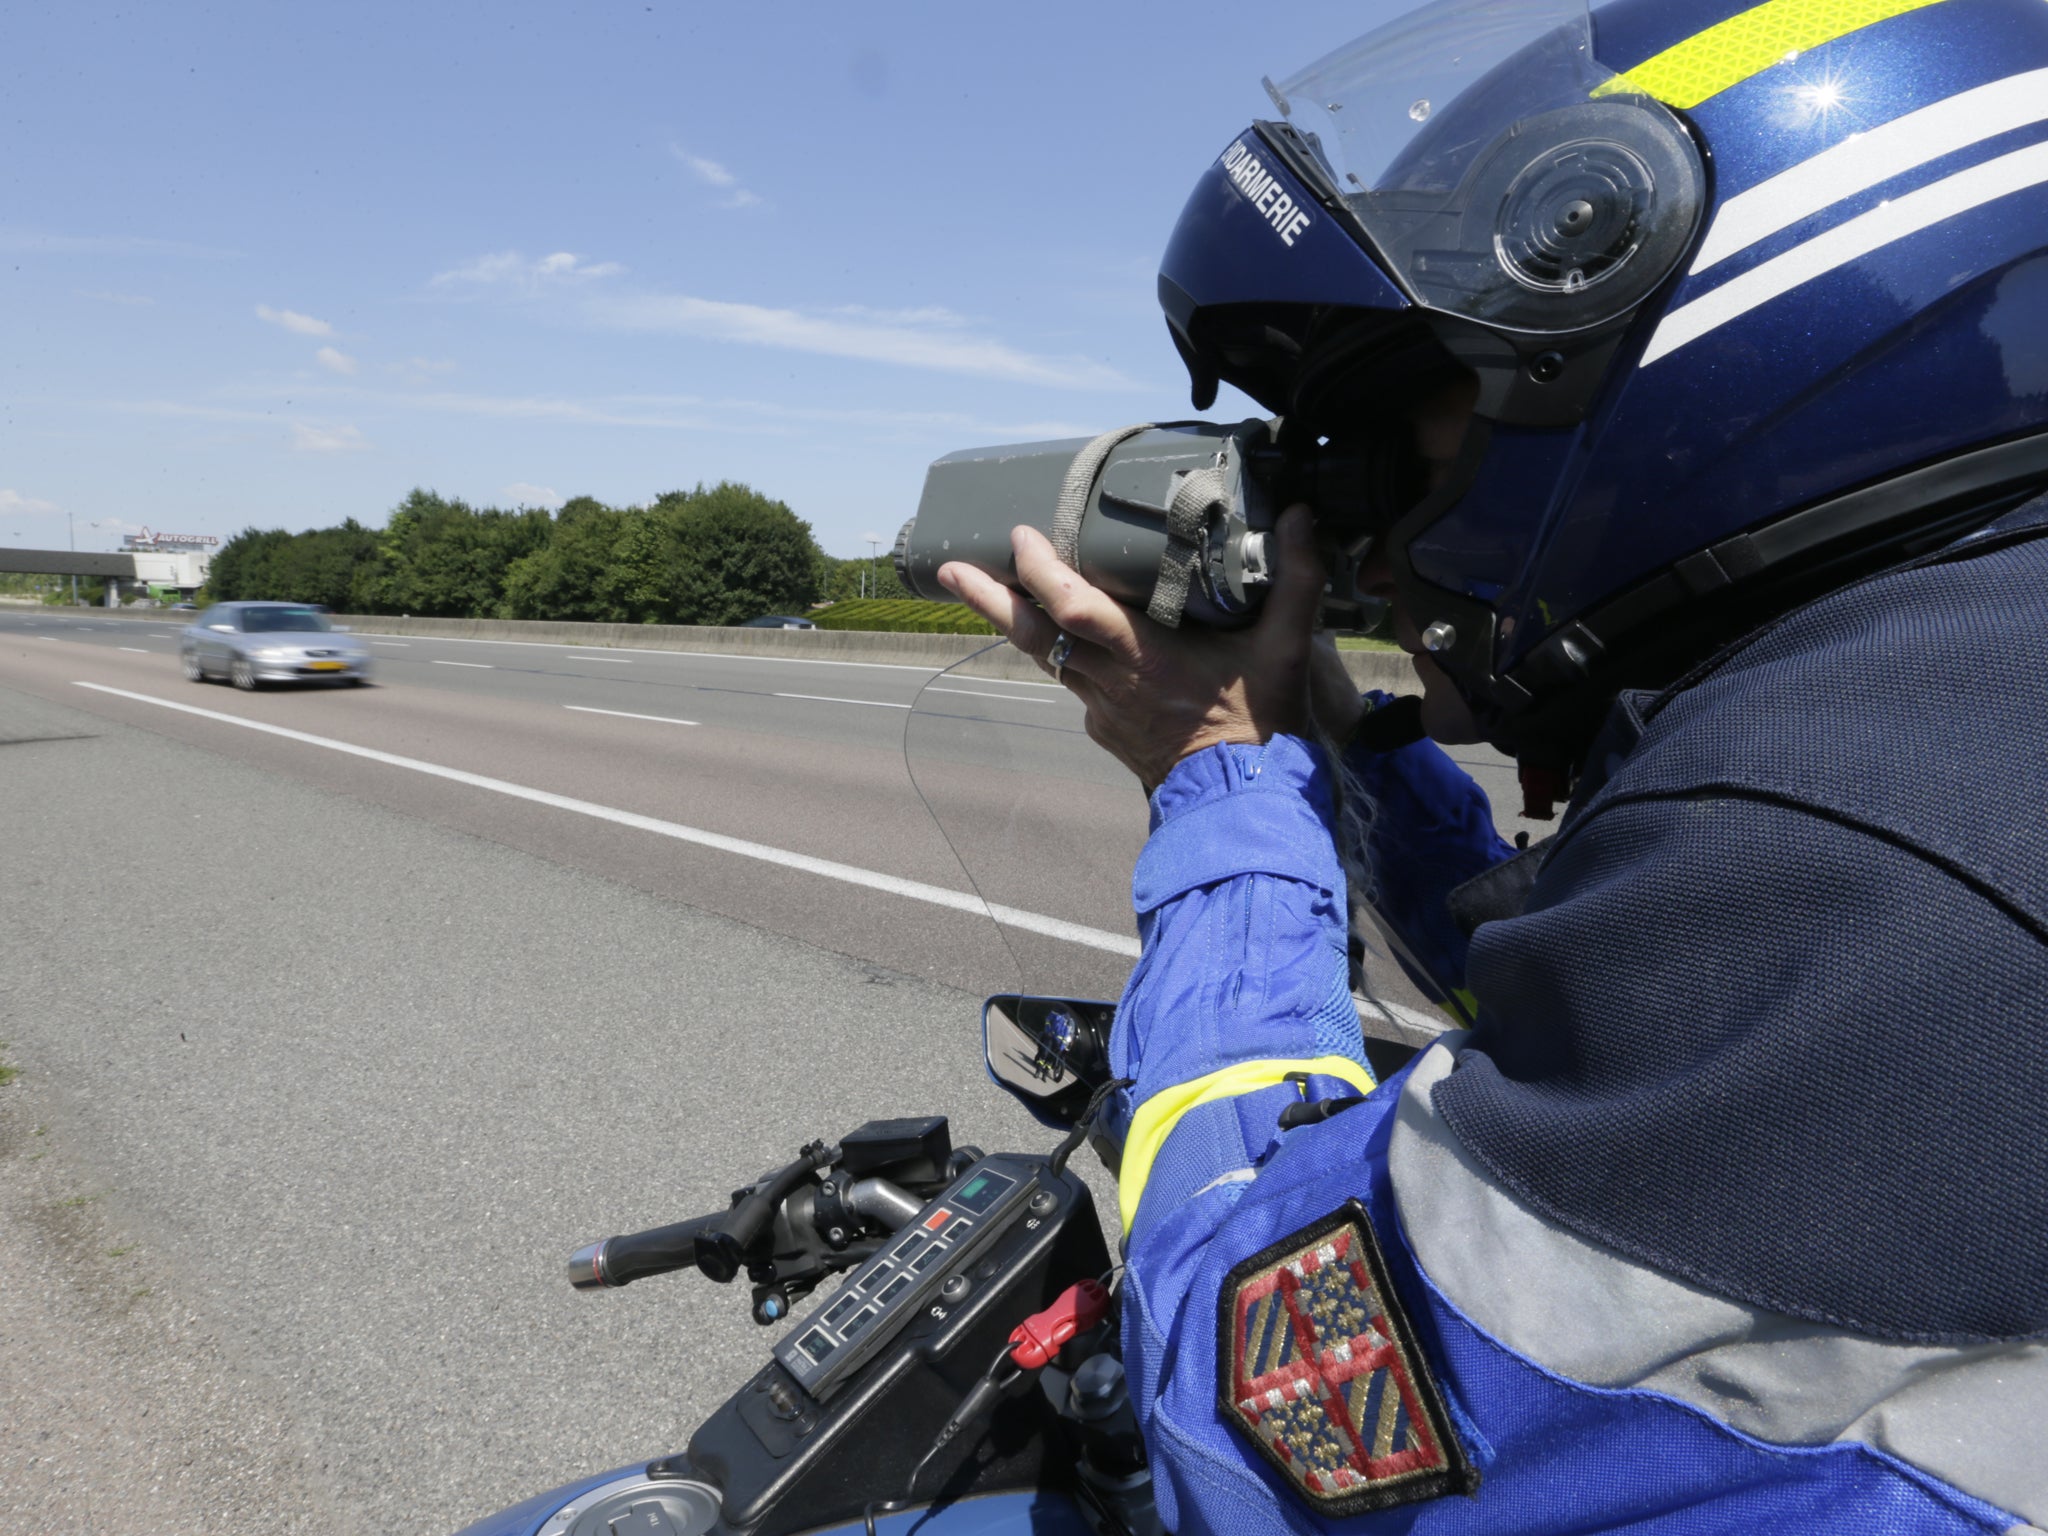 Specialist teams within the French police are equipped with binoculars that can quickly calculate speeds, helping them to pursue errant drivers